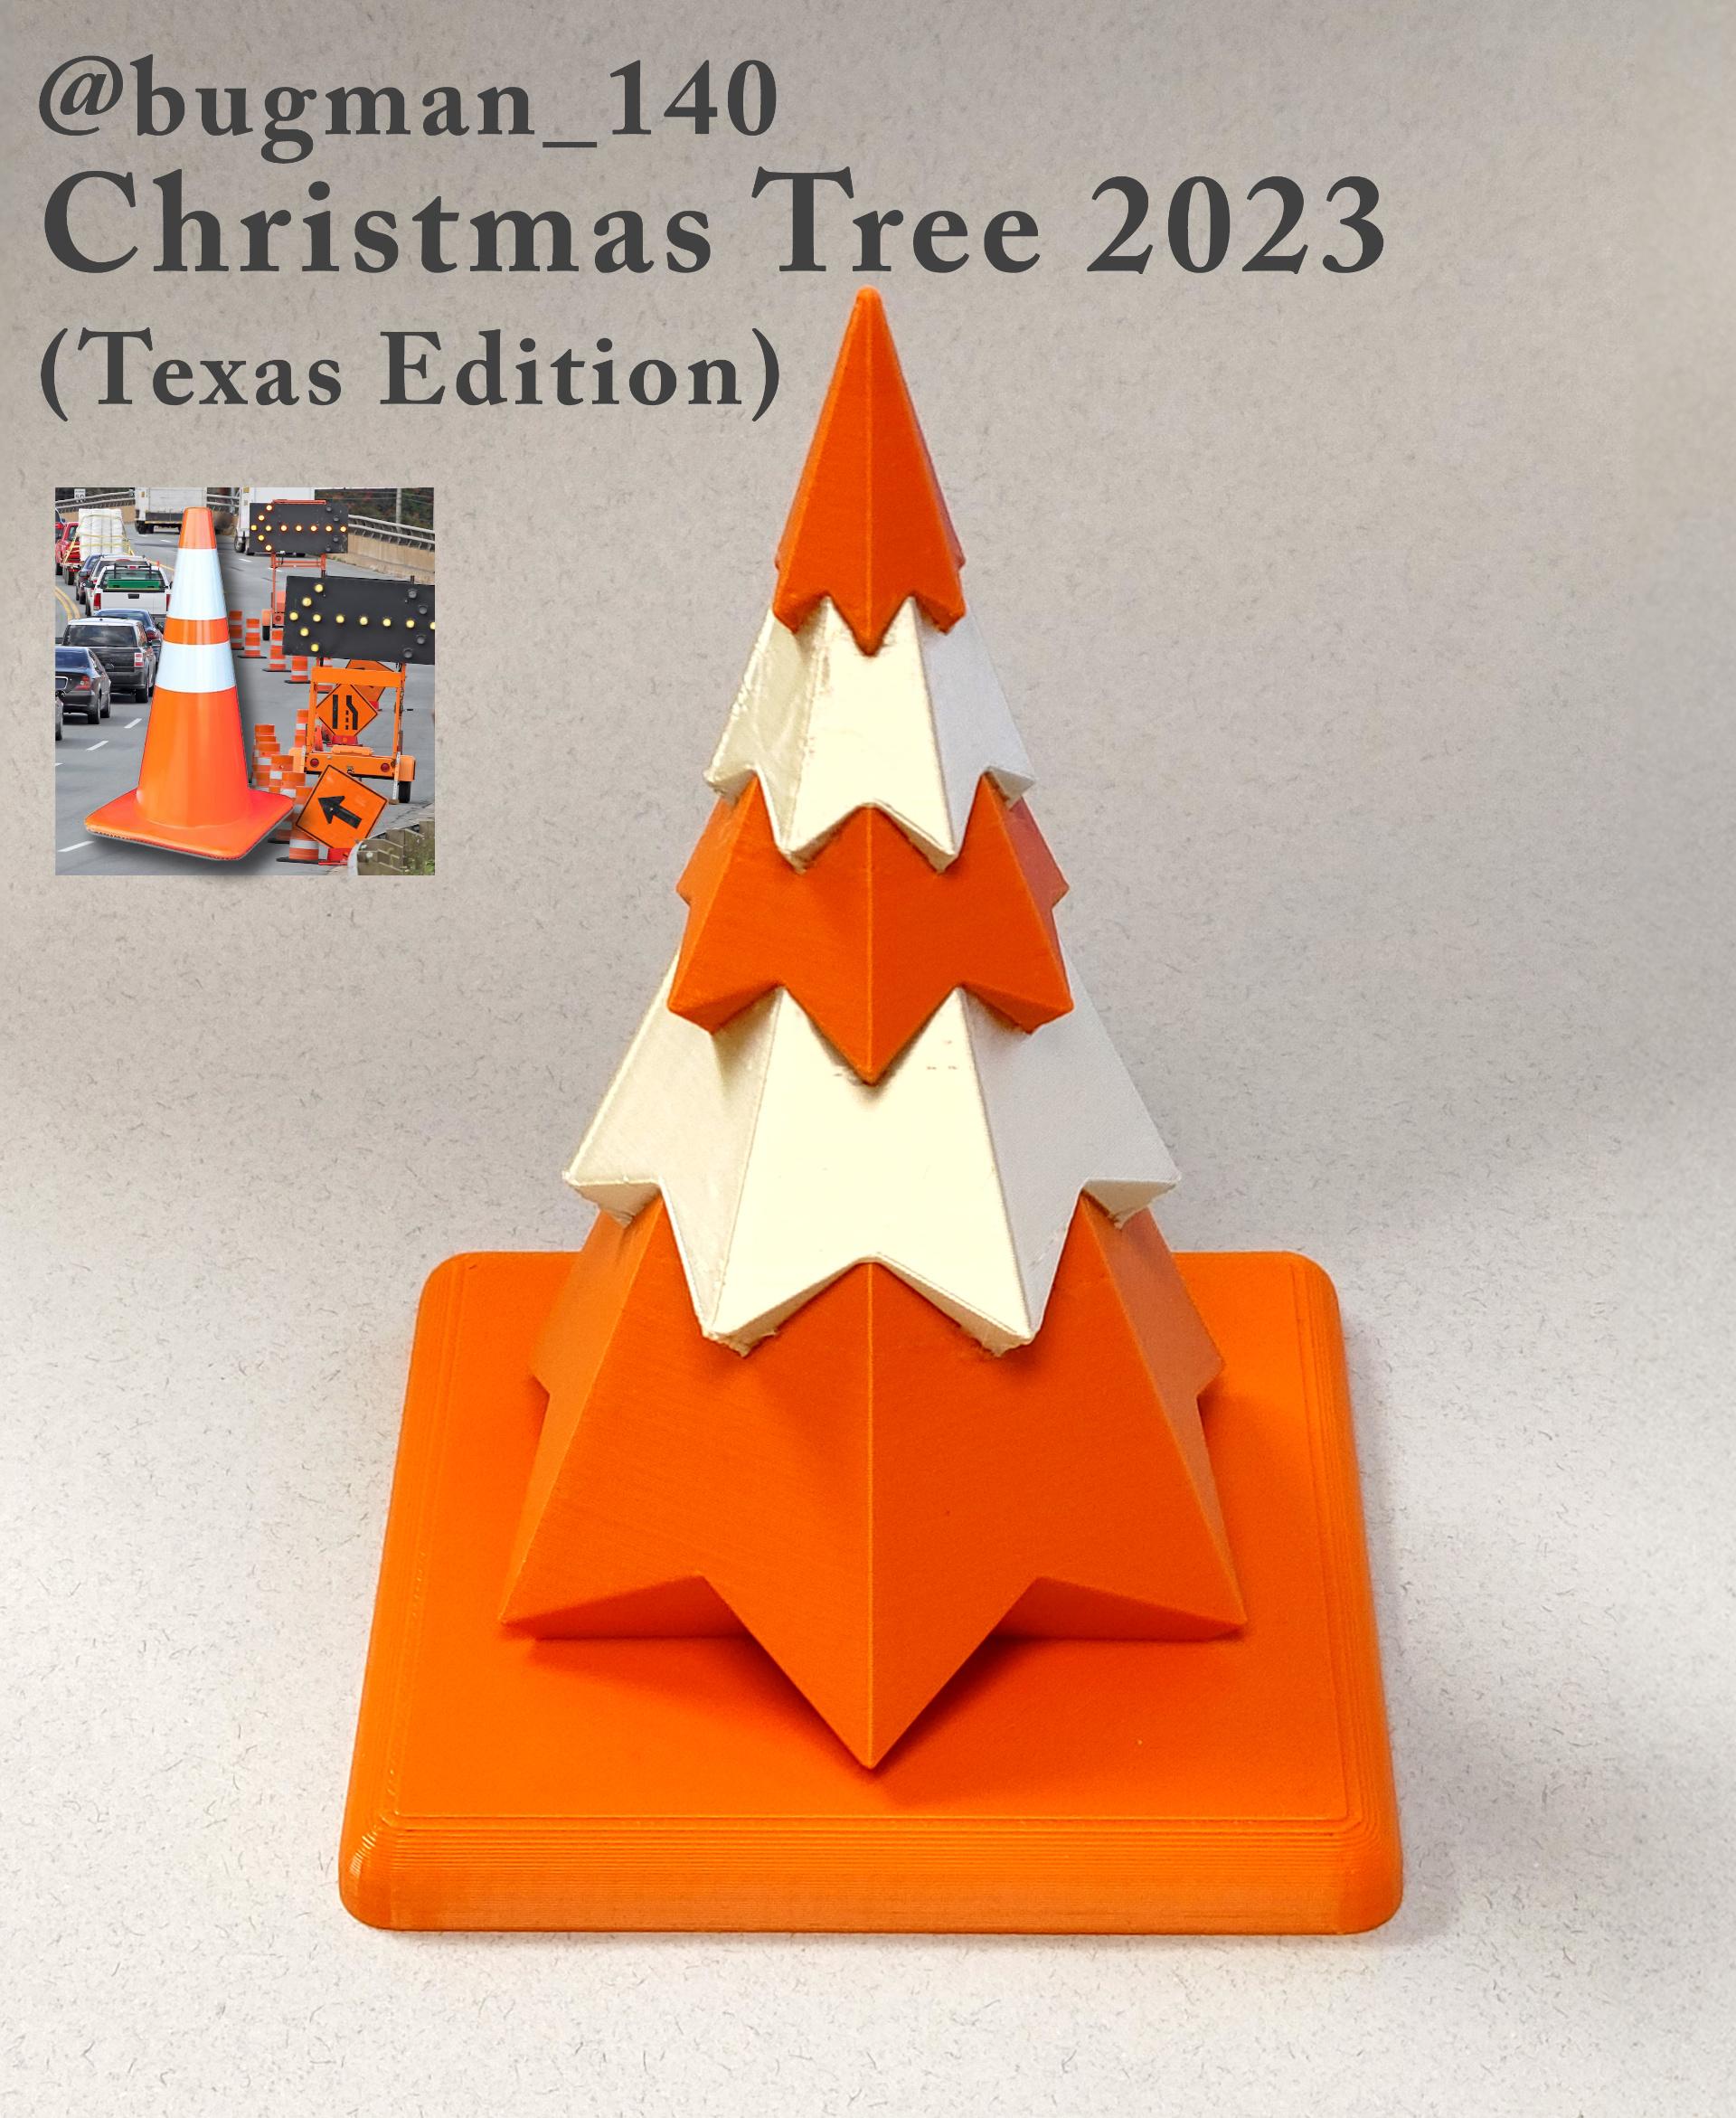 Christmas Tree 2023 - The Christmas Tree 2023 by @bugman_140
 (Texas Edition) turned out great!! Now we have a tree that reflects the true spirit of visiting loved ones around Dallas during the holidays!

(printed in FilaCube Burnt Orange and Polymaker_3D
 Silk Champagne Gold) - 3d model